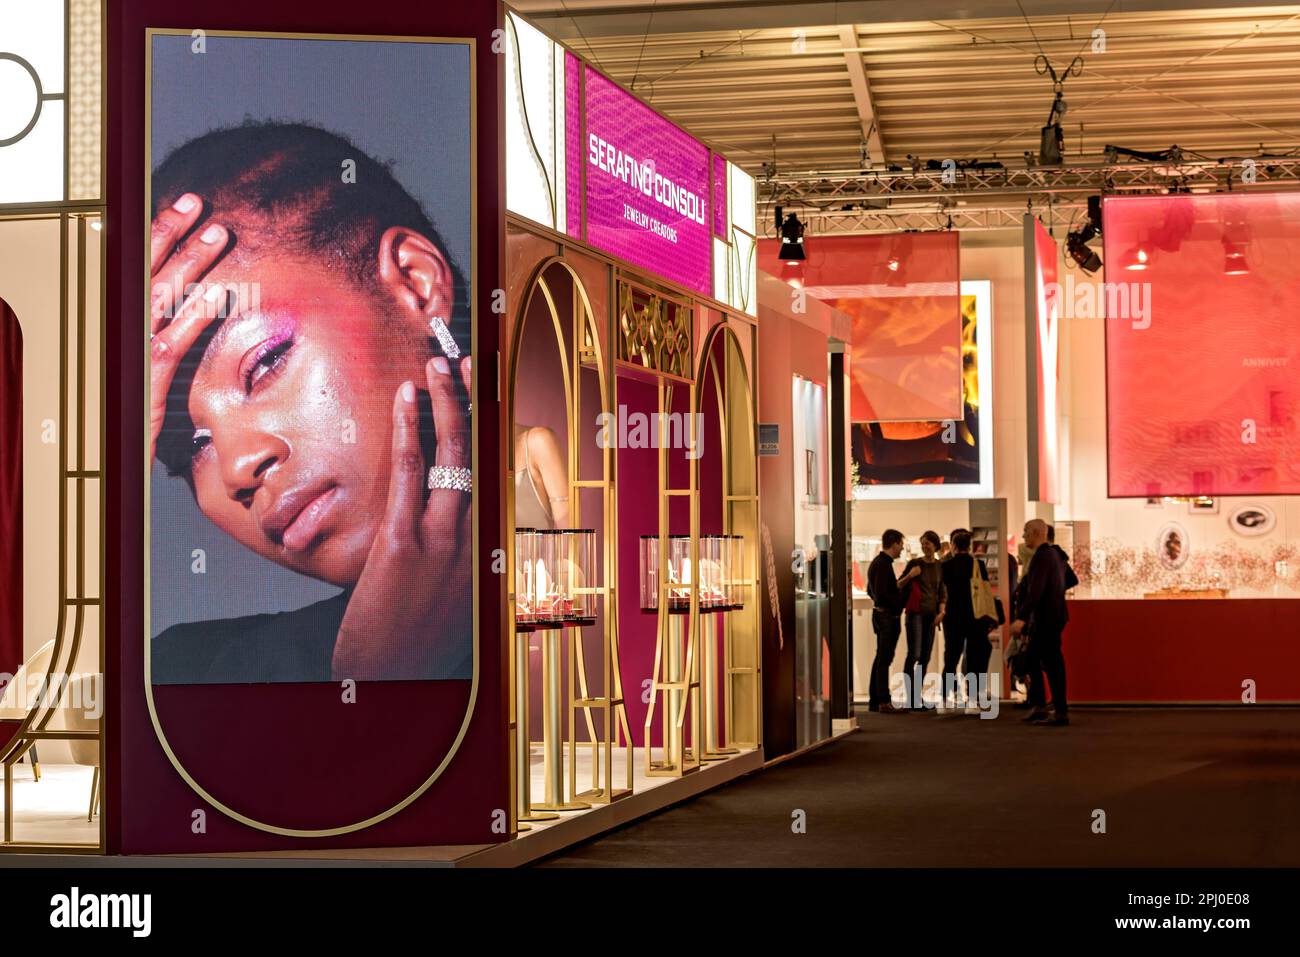 Video wall, woman with precious ring and earring, exhibition stand of jeweller Serafino Consoli Juwelery Creators, Inhorgenta, trade fair for Stock Photo